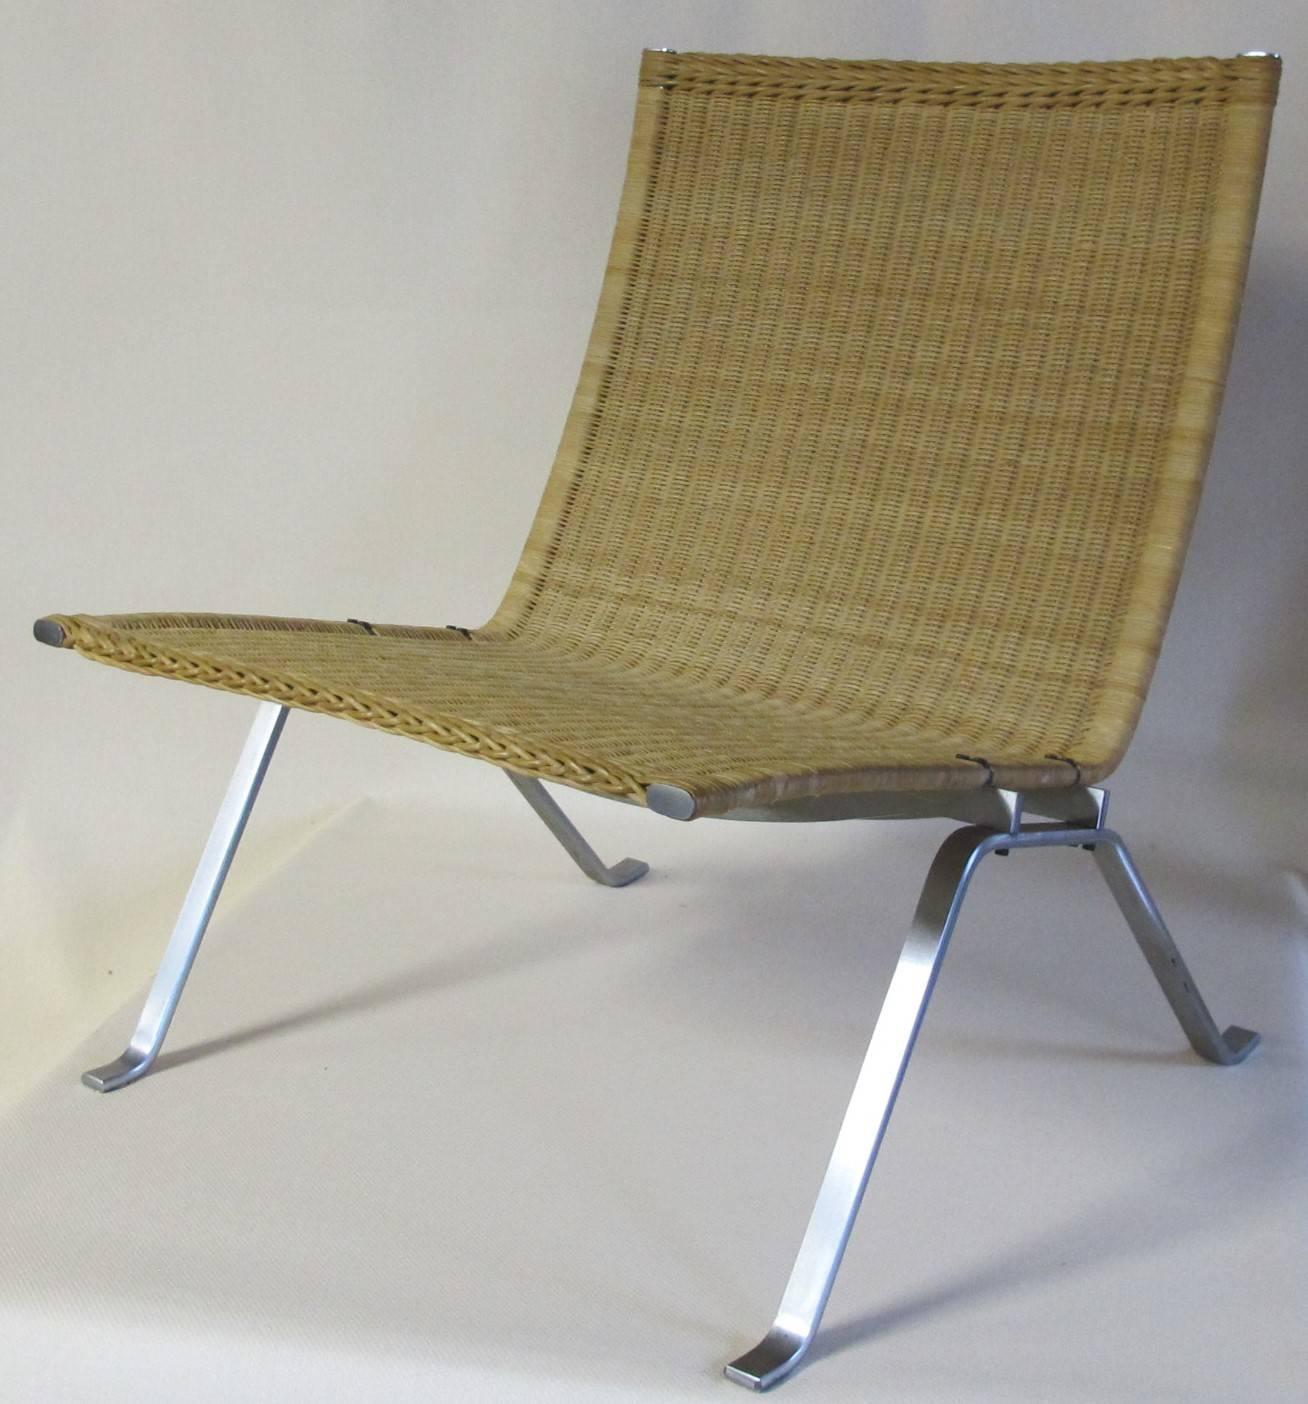 A beautiful stainless steel chair with a wickered seat, known as model PK22. Designed by Poul Kjaerholm and manufactured by Kold Christensen. This PK22 chair is marked with a stamp of the manufacturer and shows the magnificence of simplicity of